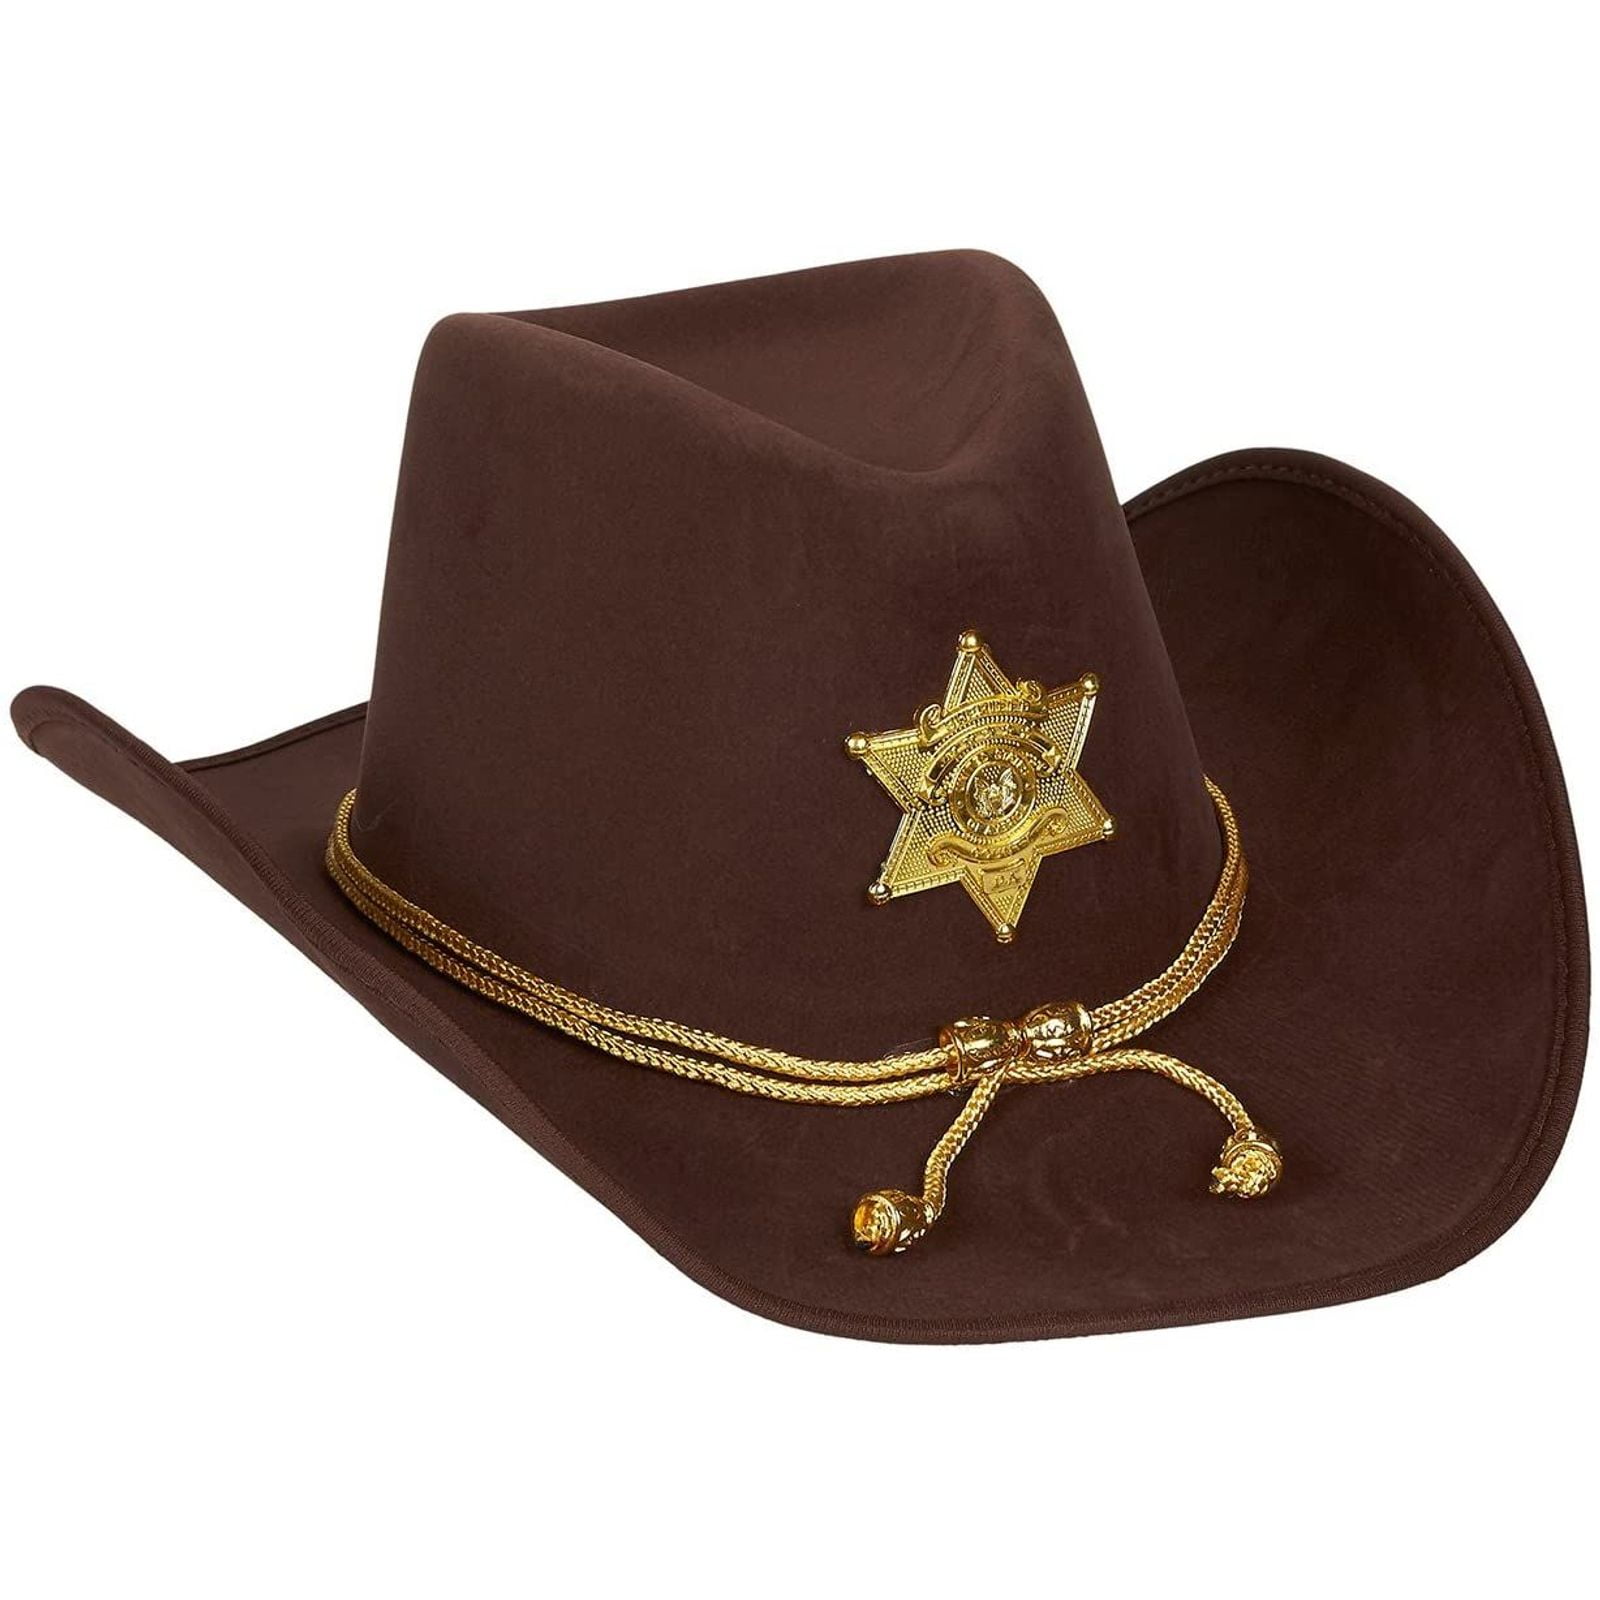 Teen Adult Size Original Ropes Western Cowboy Hat Cattleman Unisex Costume Party 